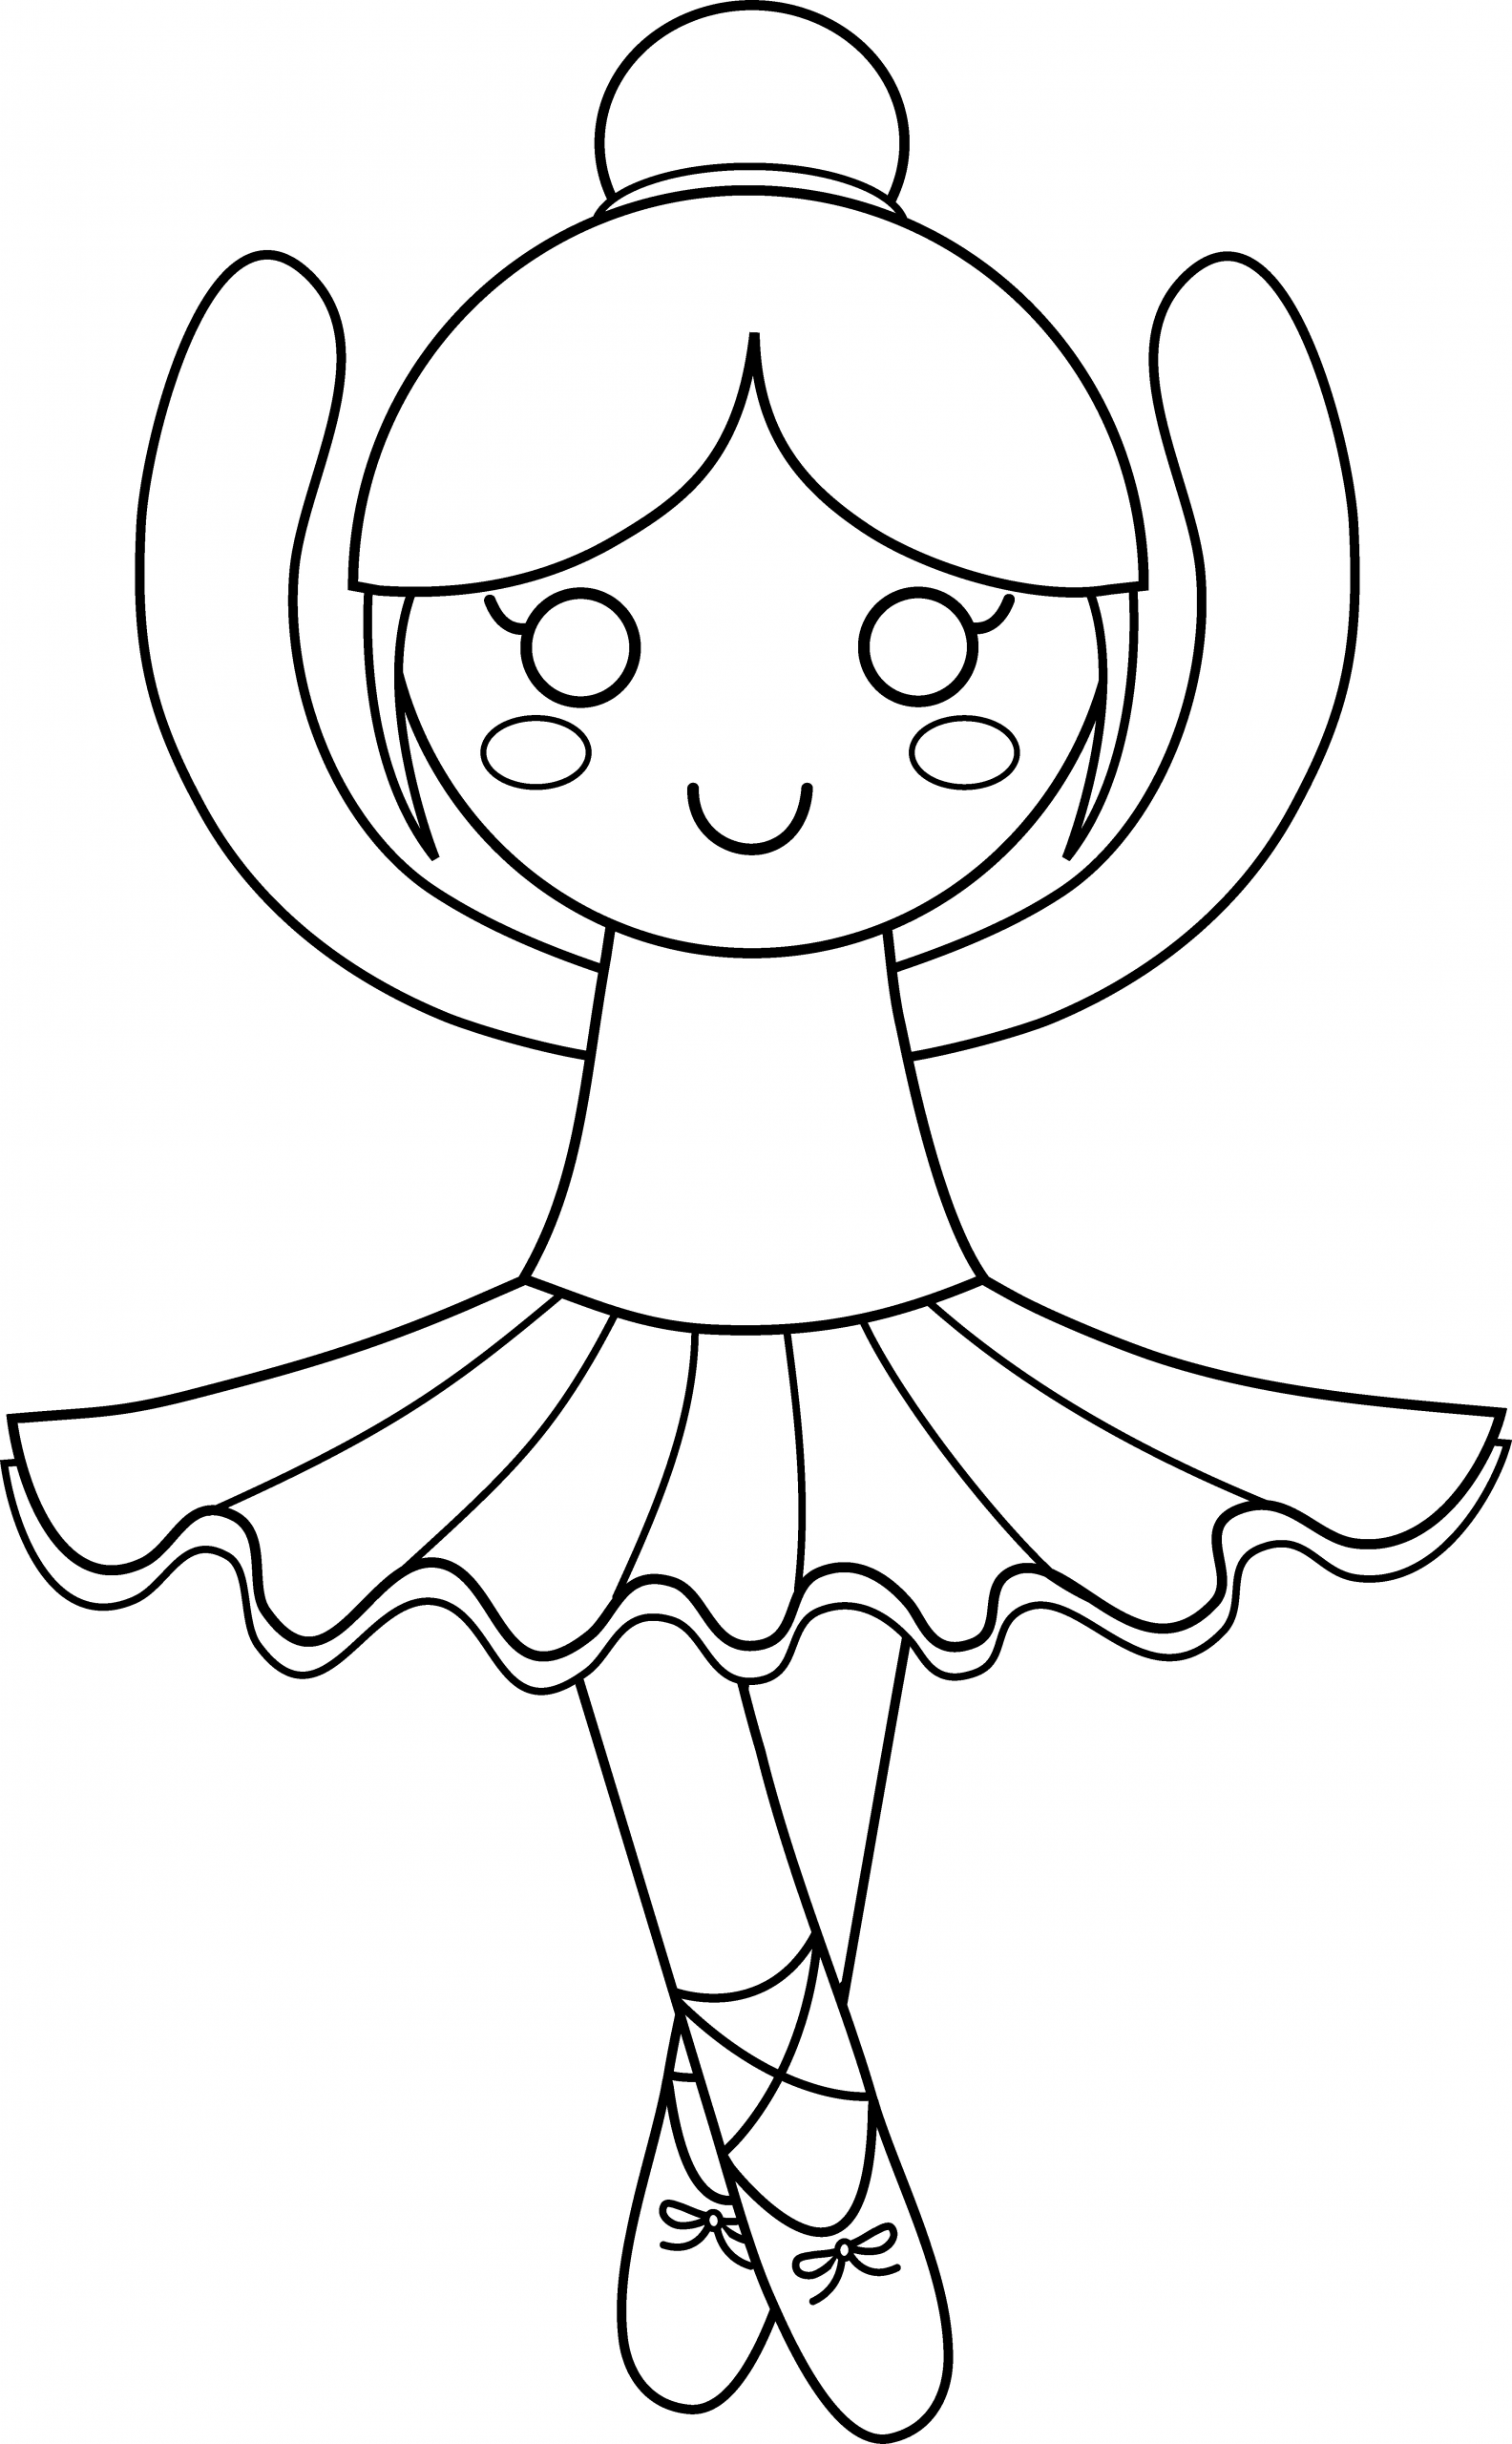 Ballerina Coloring Pages For Kids
 Cute Ballerina Coloring Page